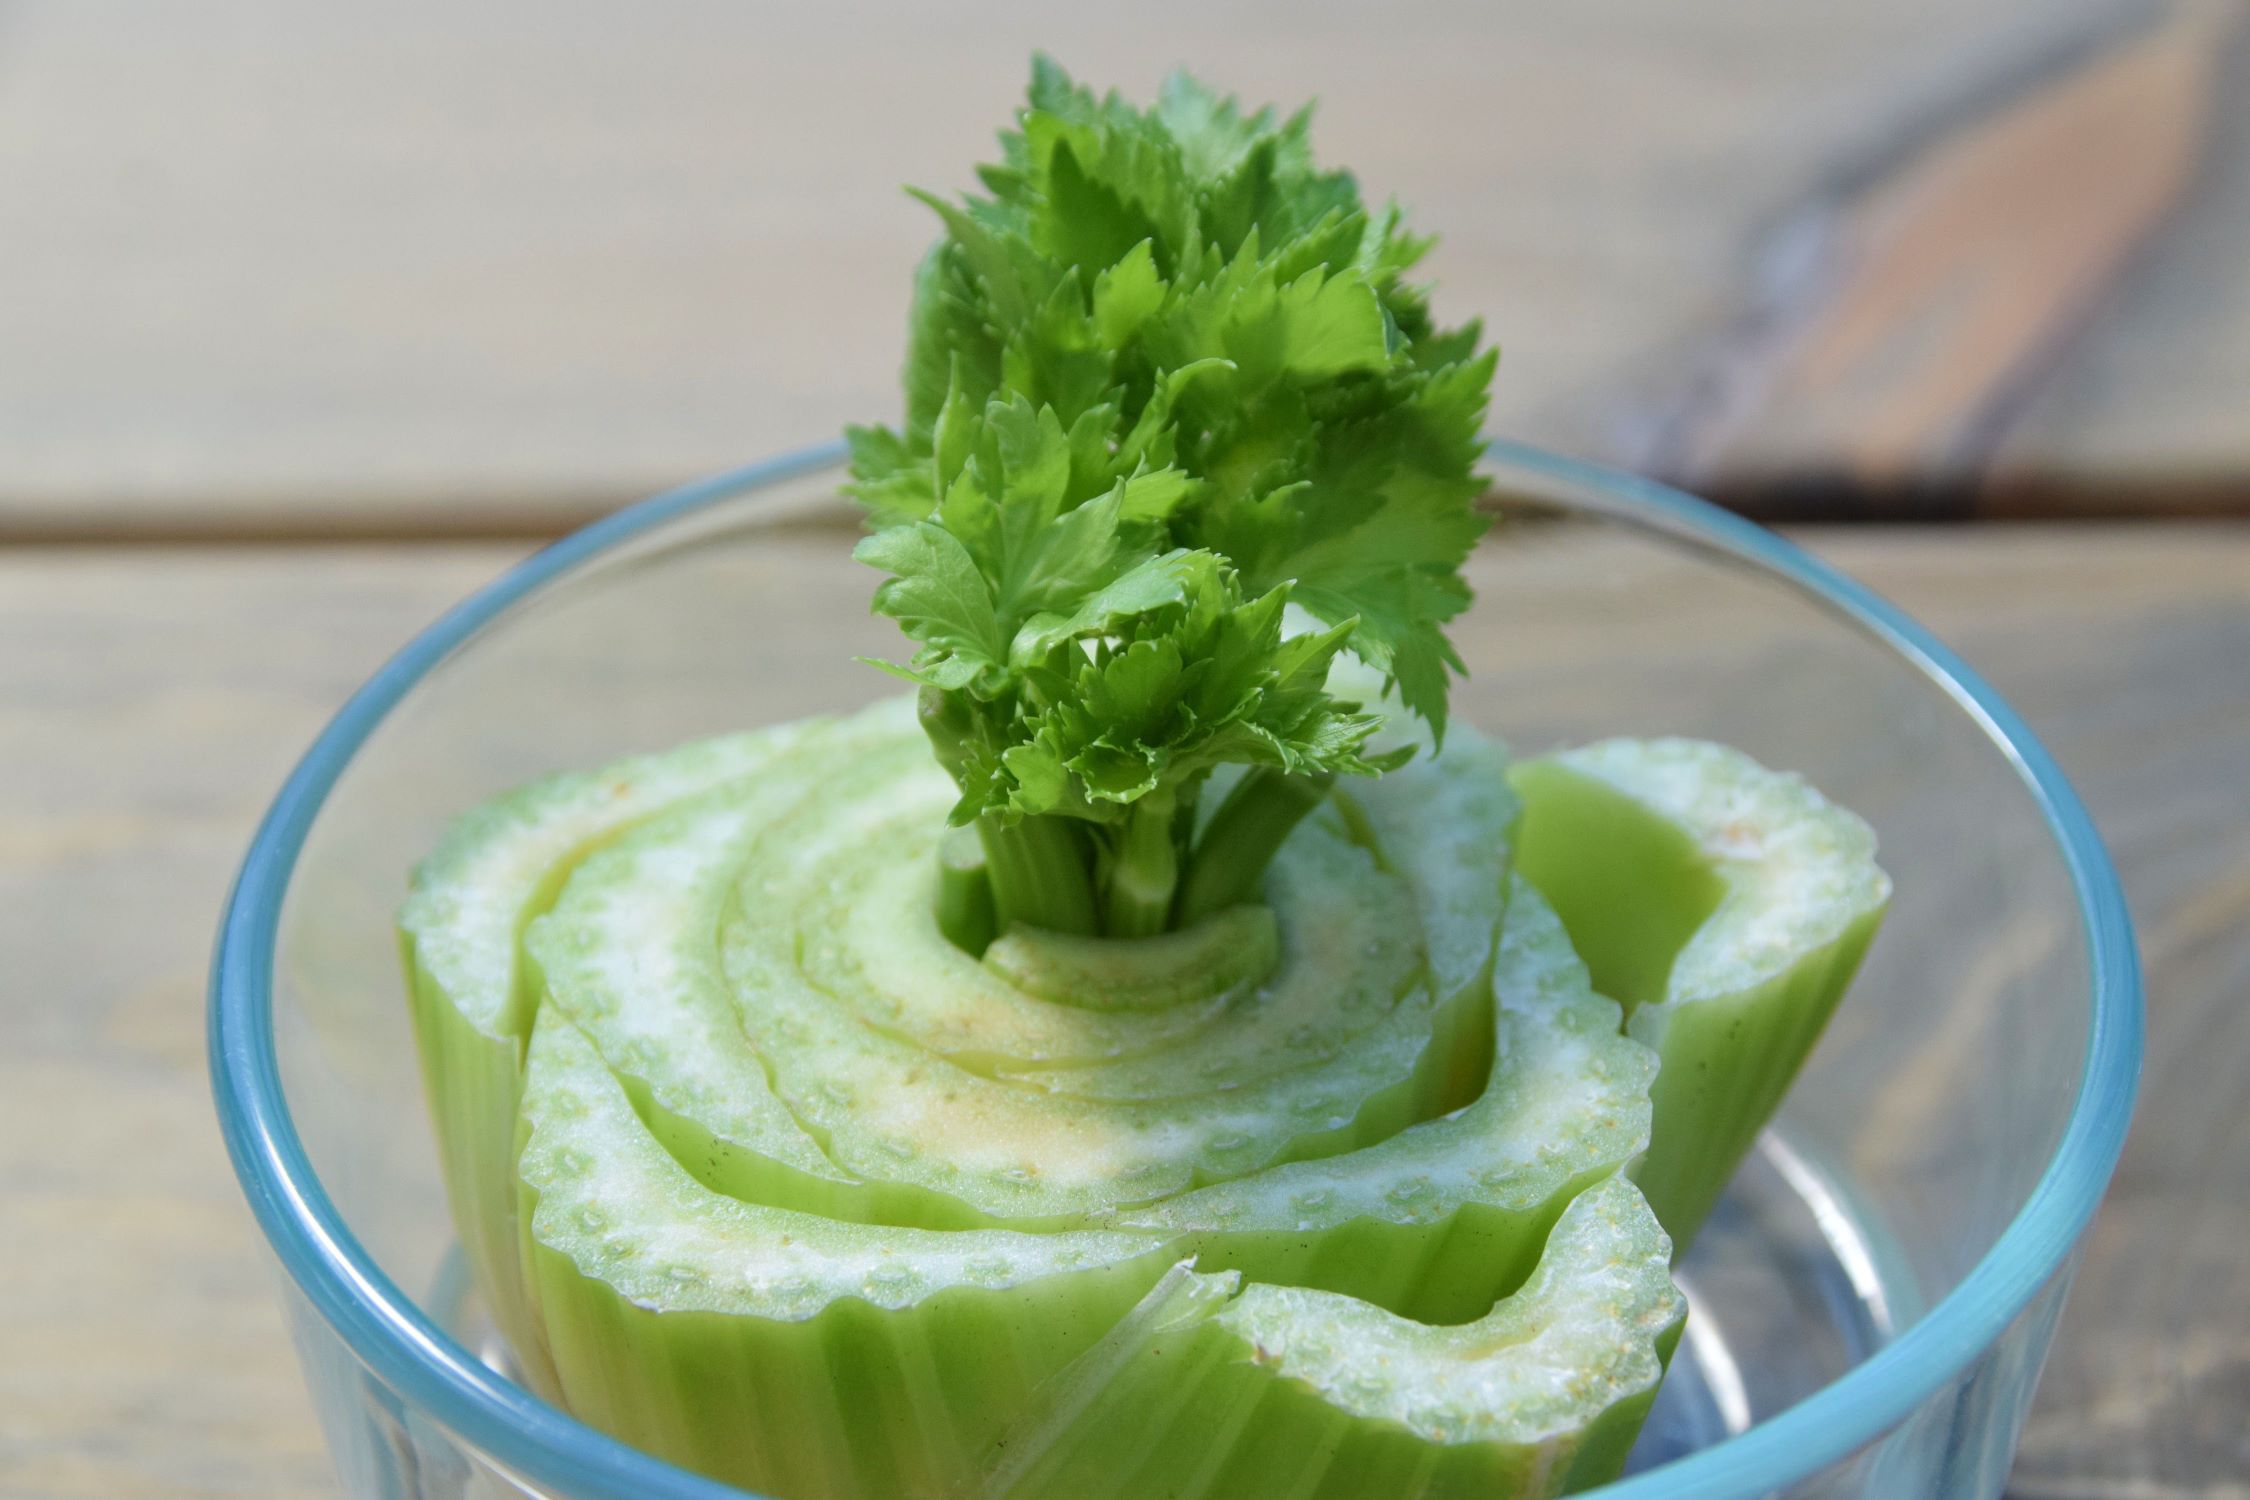 What Will Happen To A Celery Stick That Is Placed In A Glass Of Water?